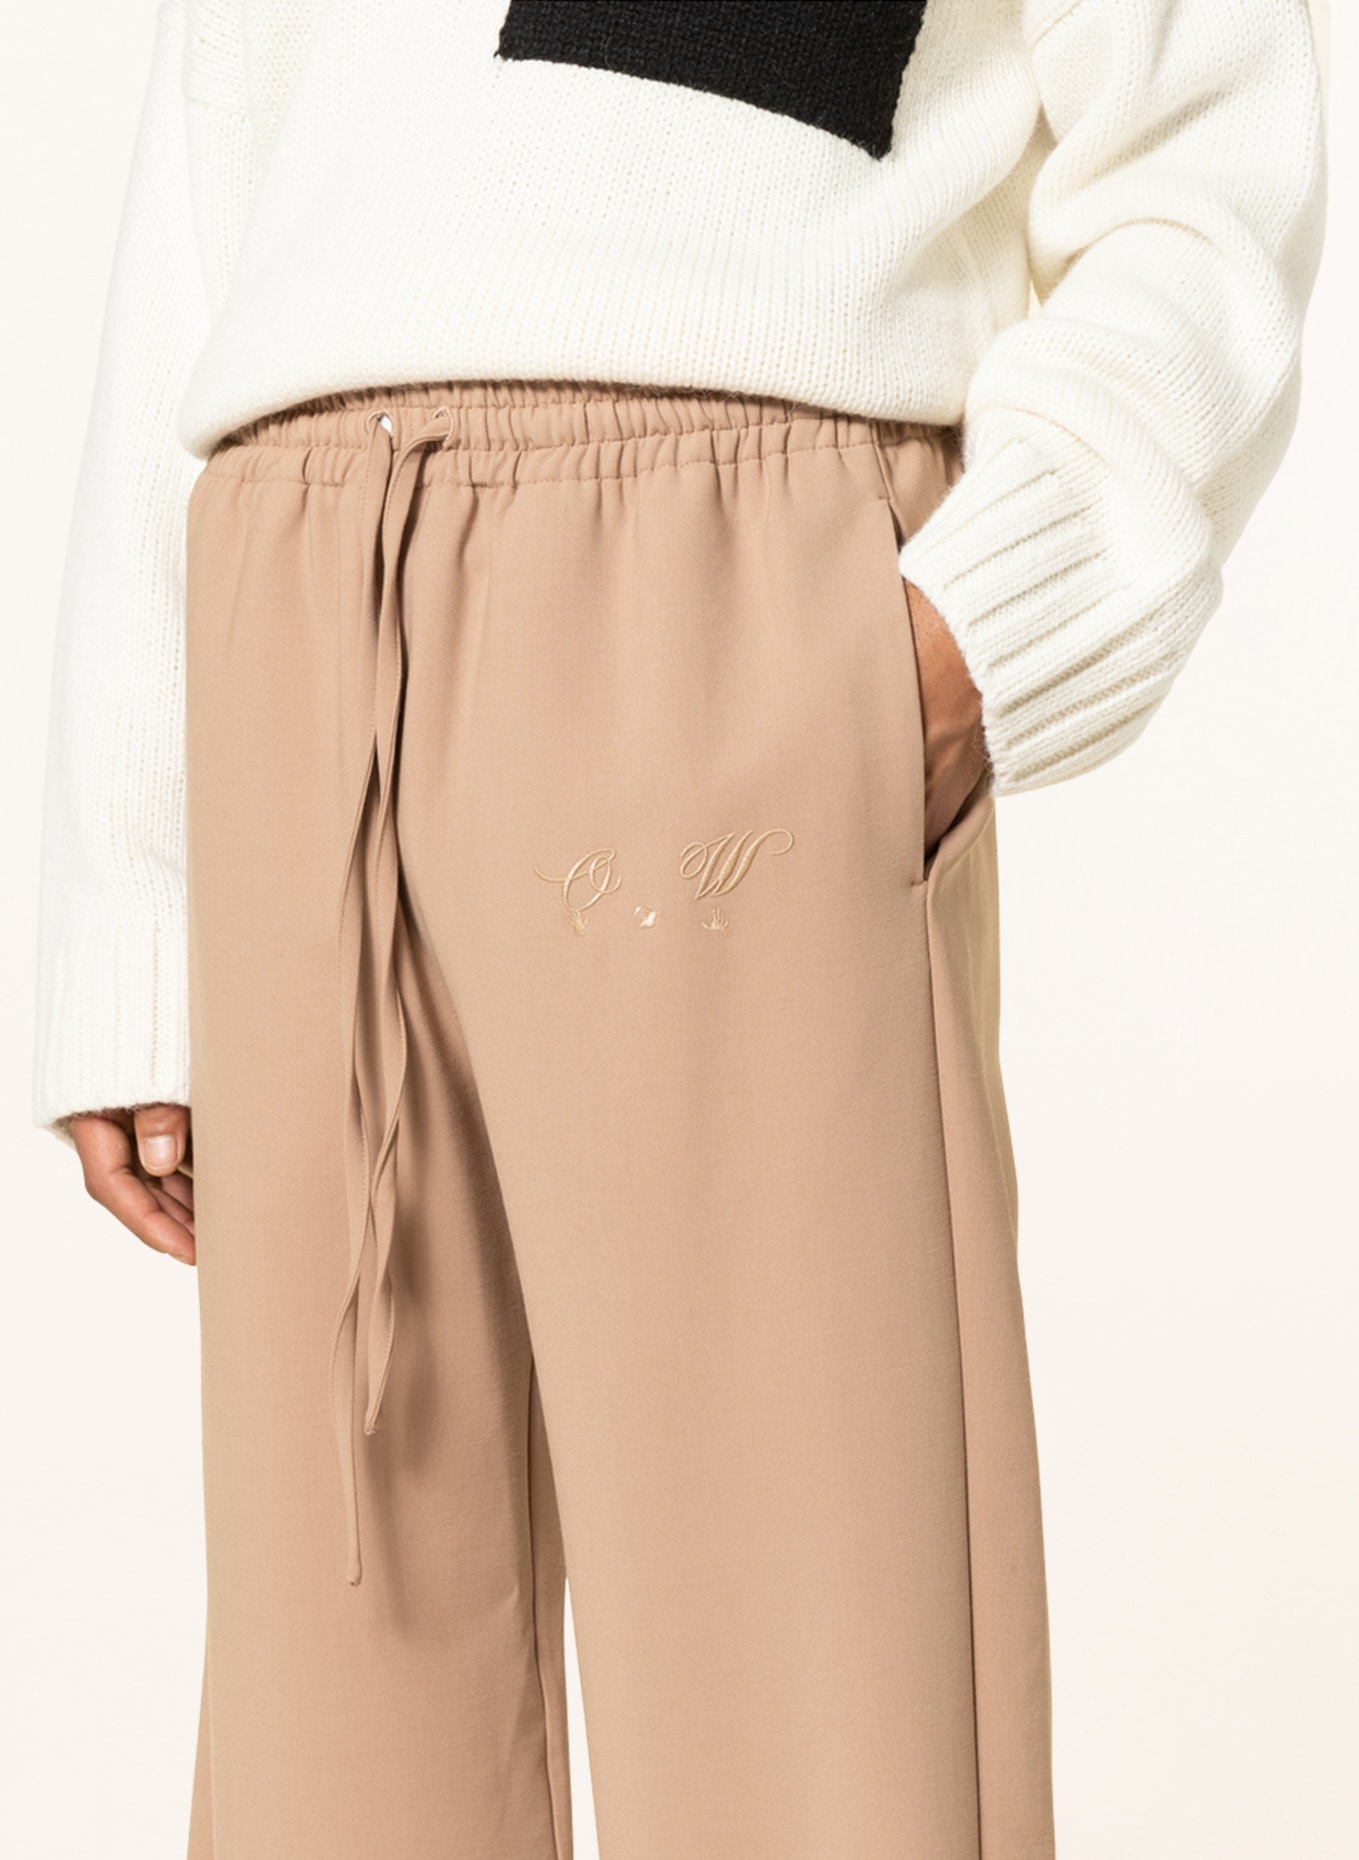 Off-White Pants in jogger style regular fit, Color: CAMEL (Image 5)